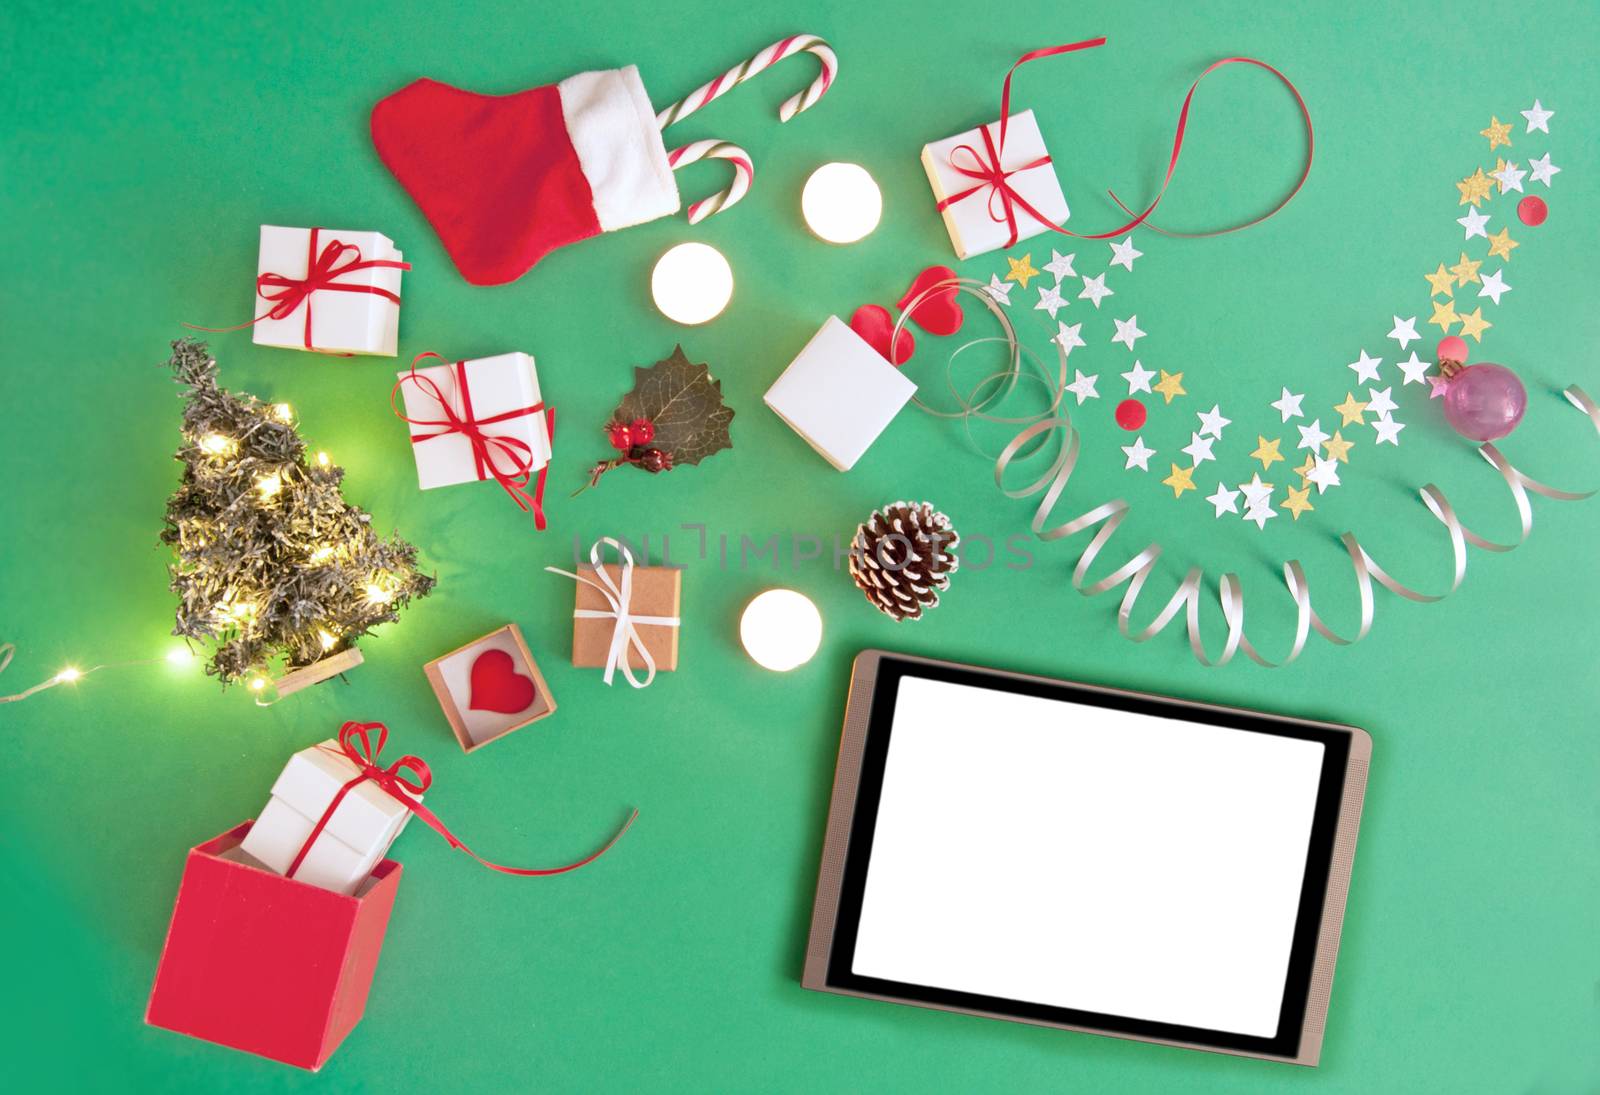 Christmas gifts, baubles, and decorations coming out of a gift box with a blank tablet 